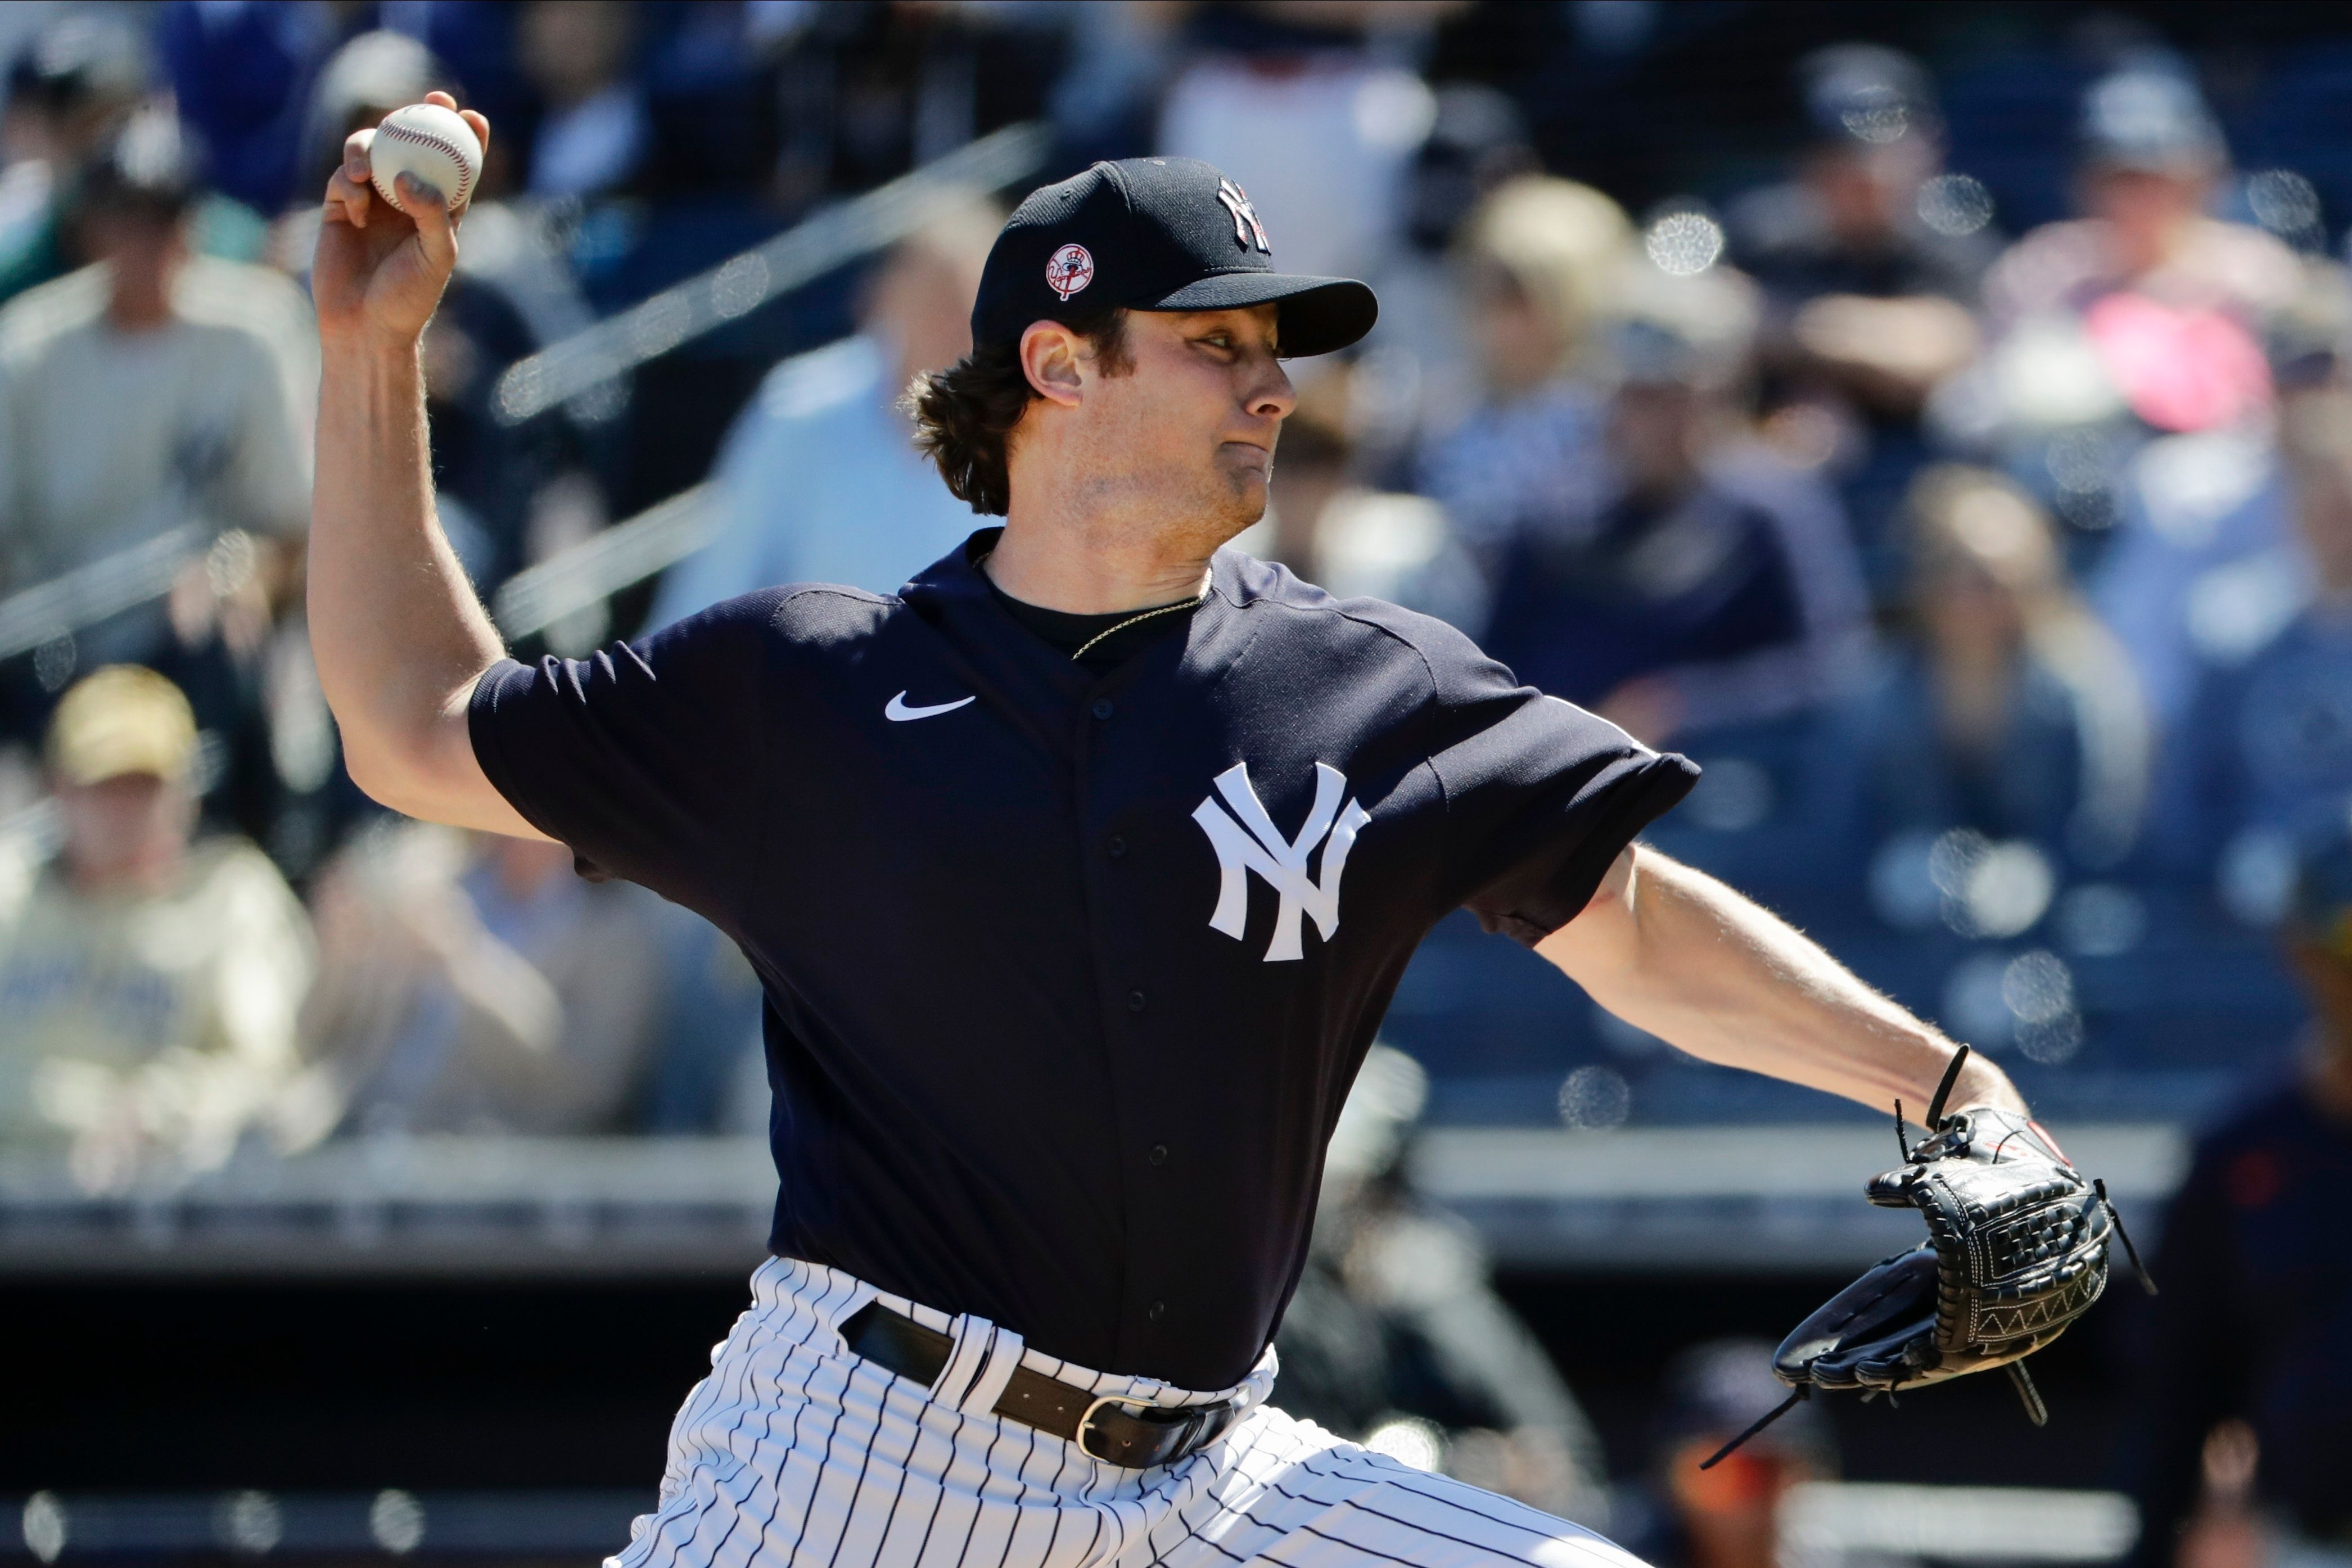 Amazon Prime Video will stream 21 Yankees games this season The Seattle Times